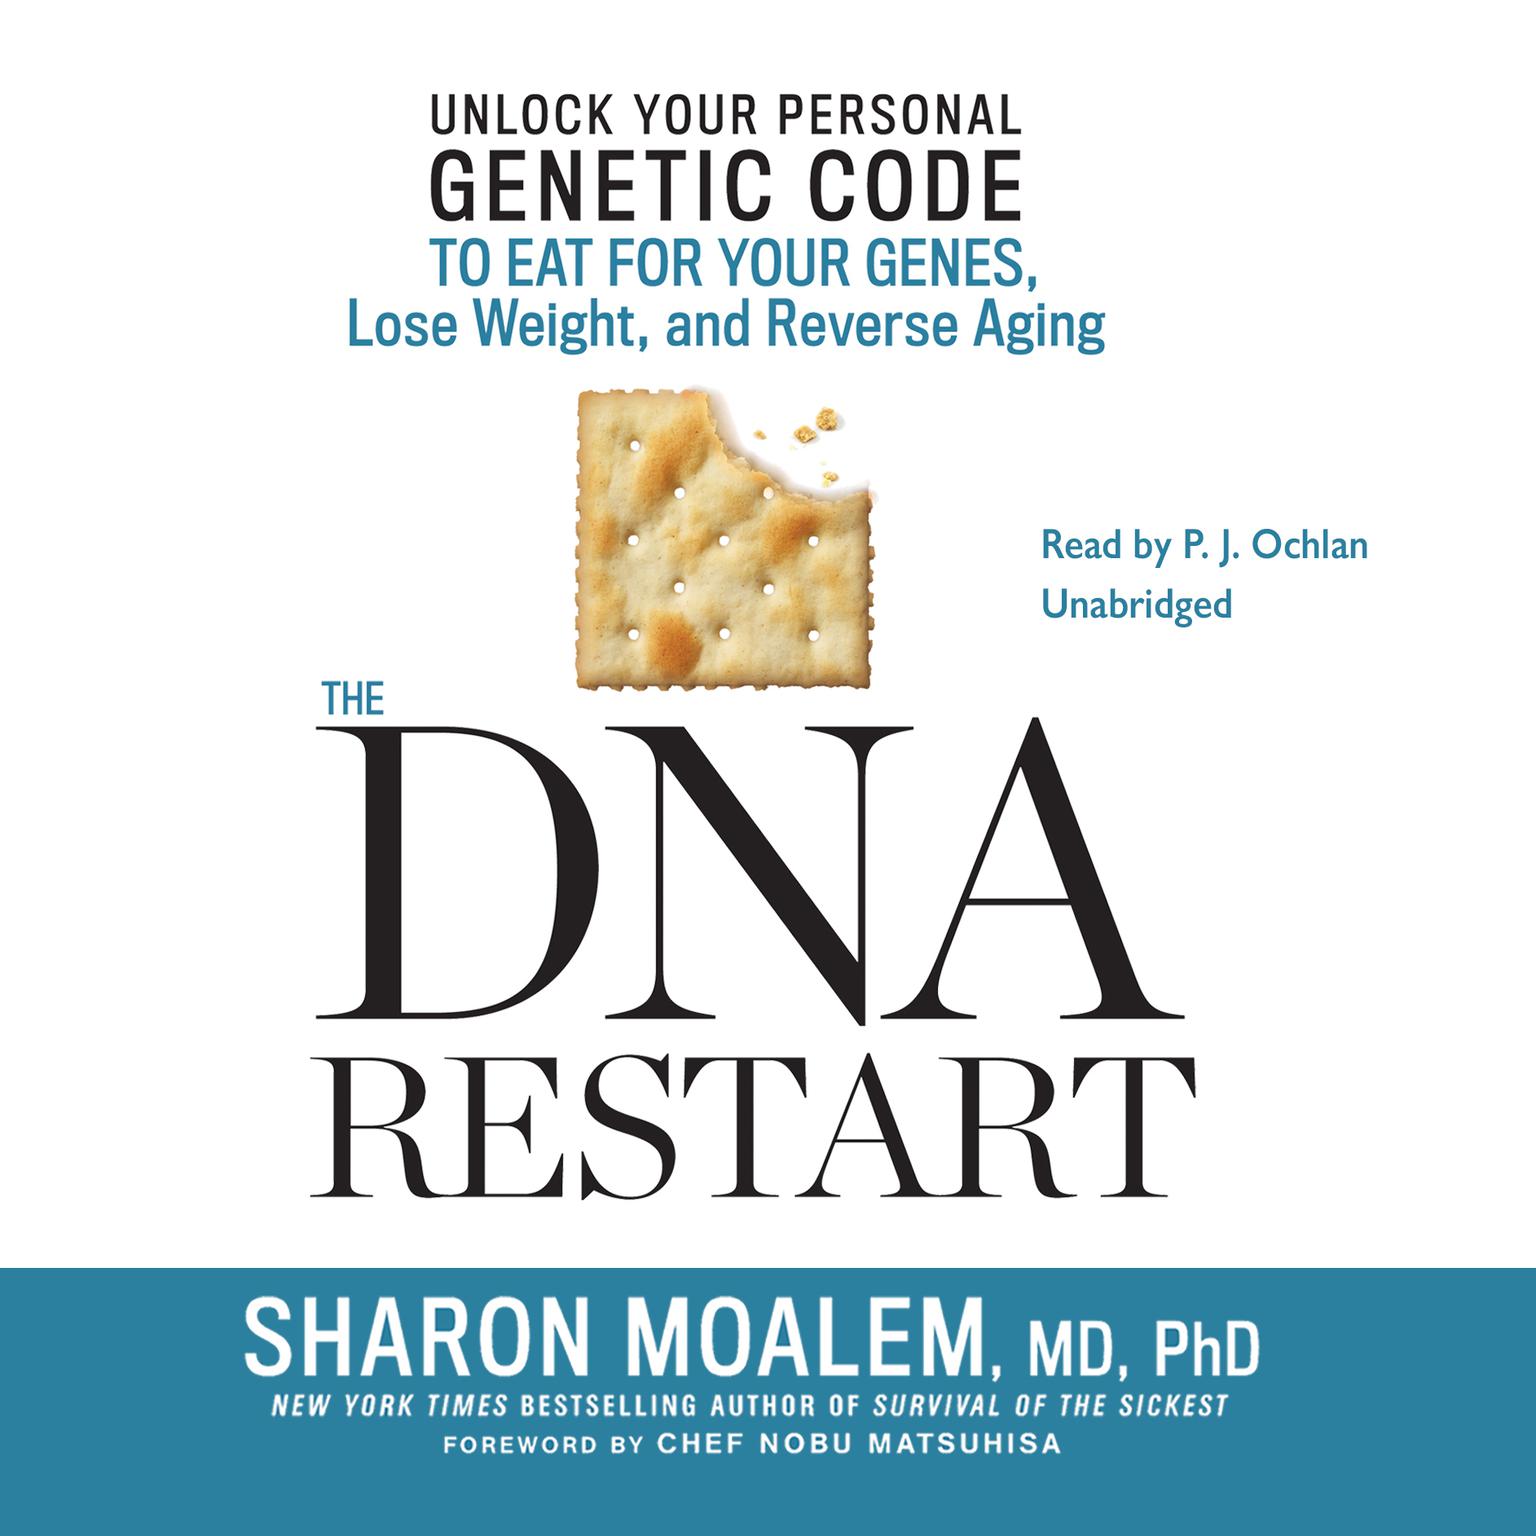 The DNA Restart: Unlock Your Personal Genetic Code to Eat for Your Genes, Lose Weight, and Reverse Aging Audiobook, by Sharon Moalem